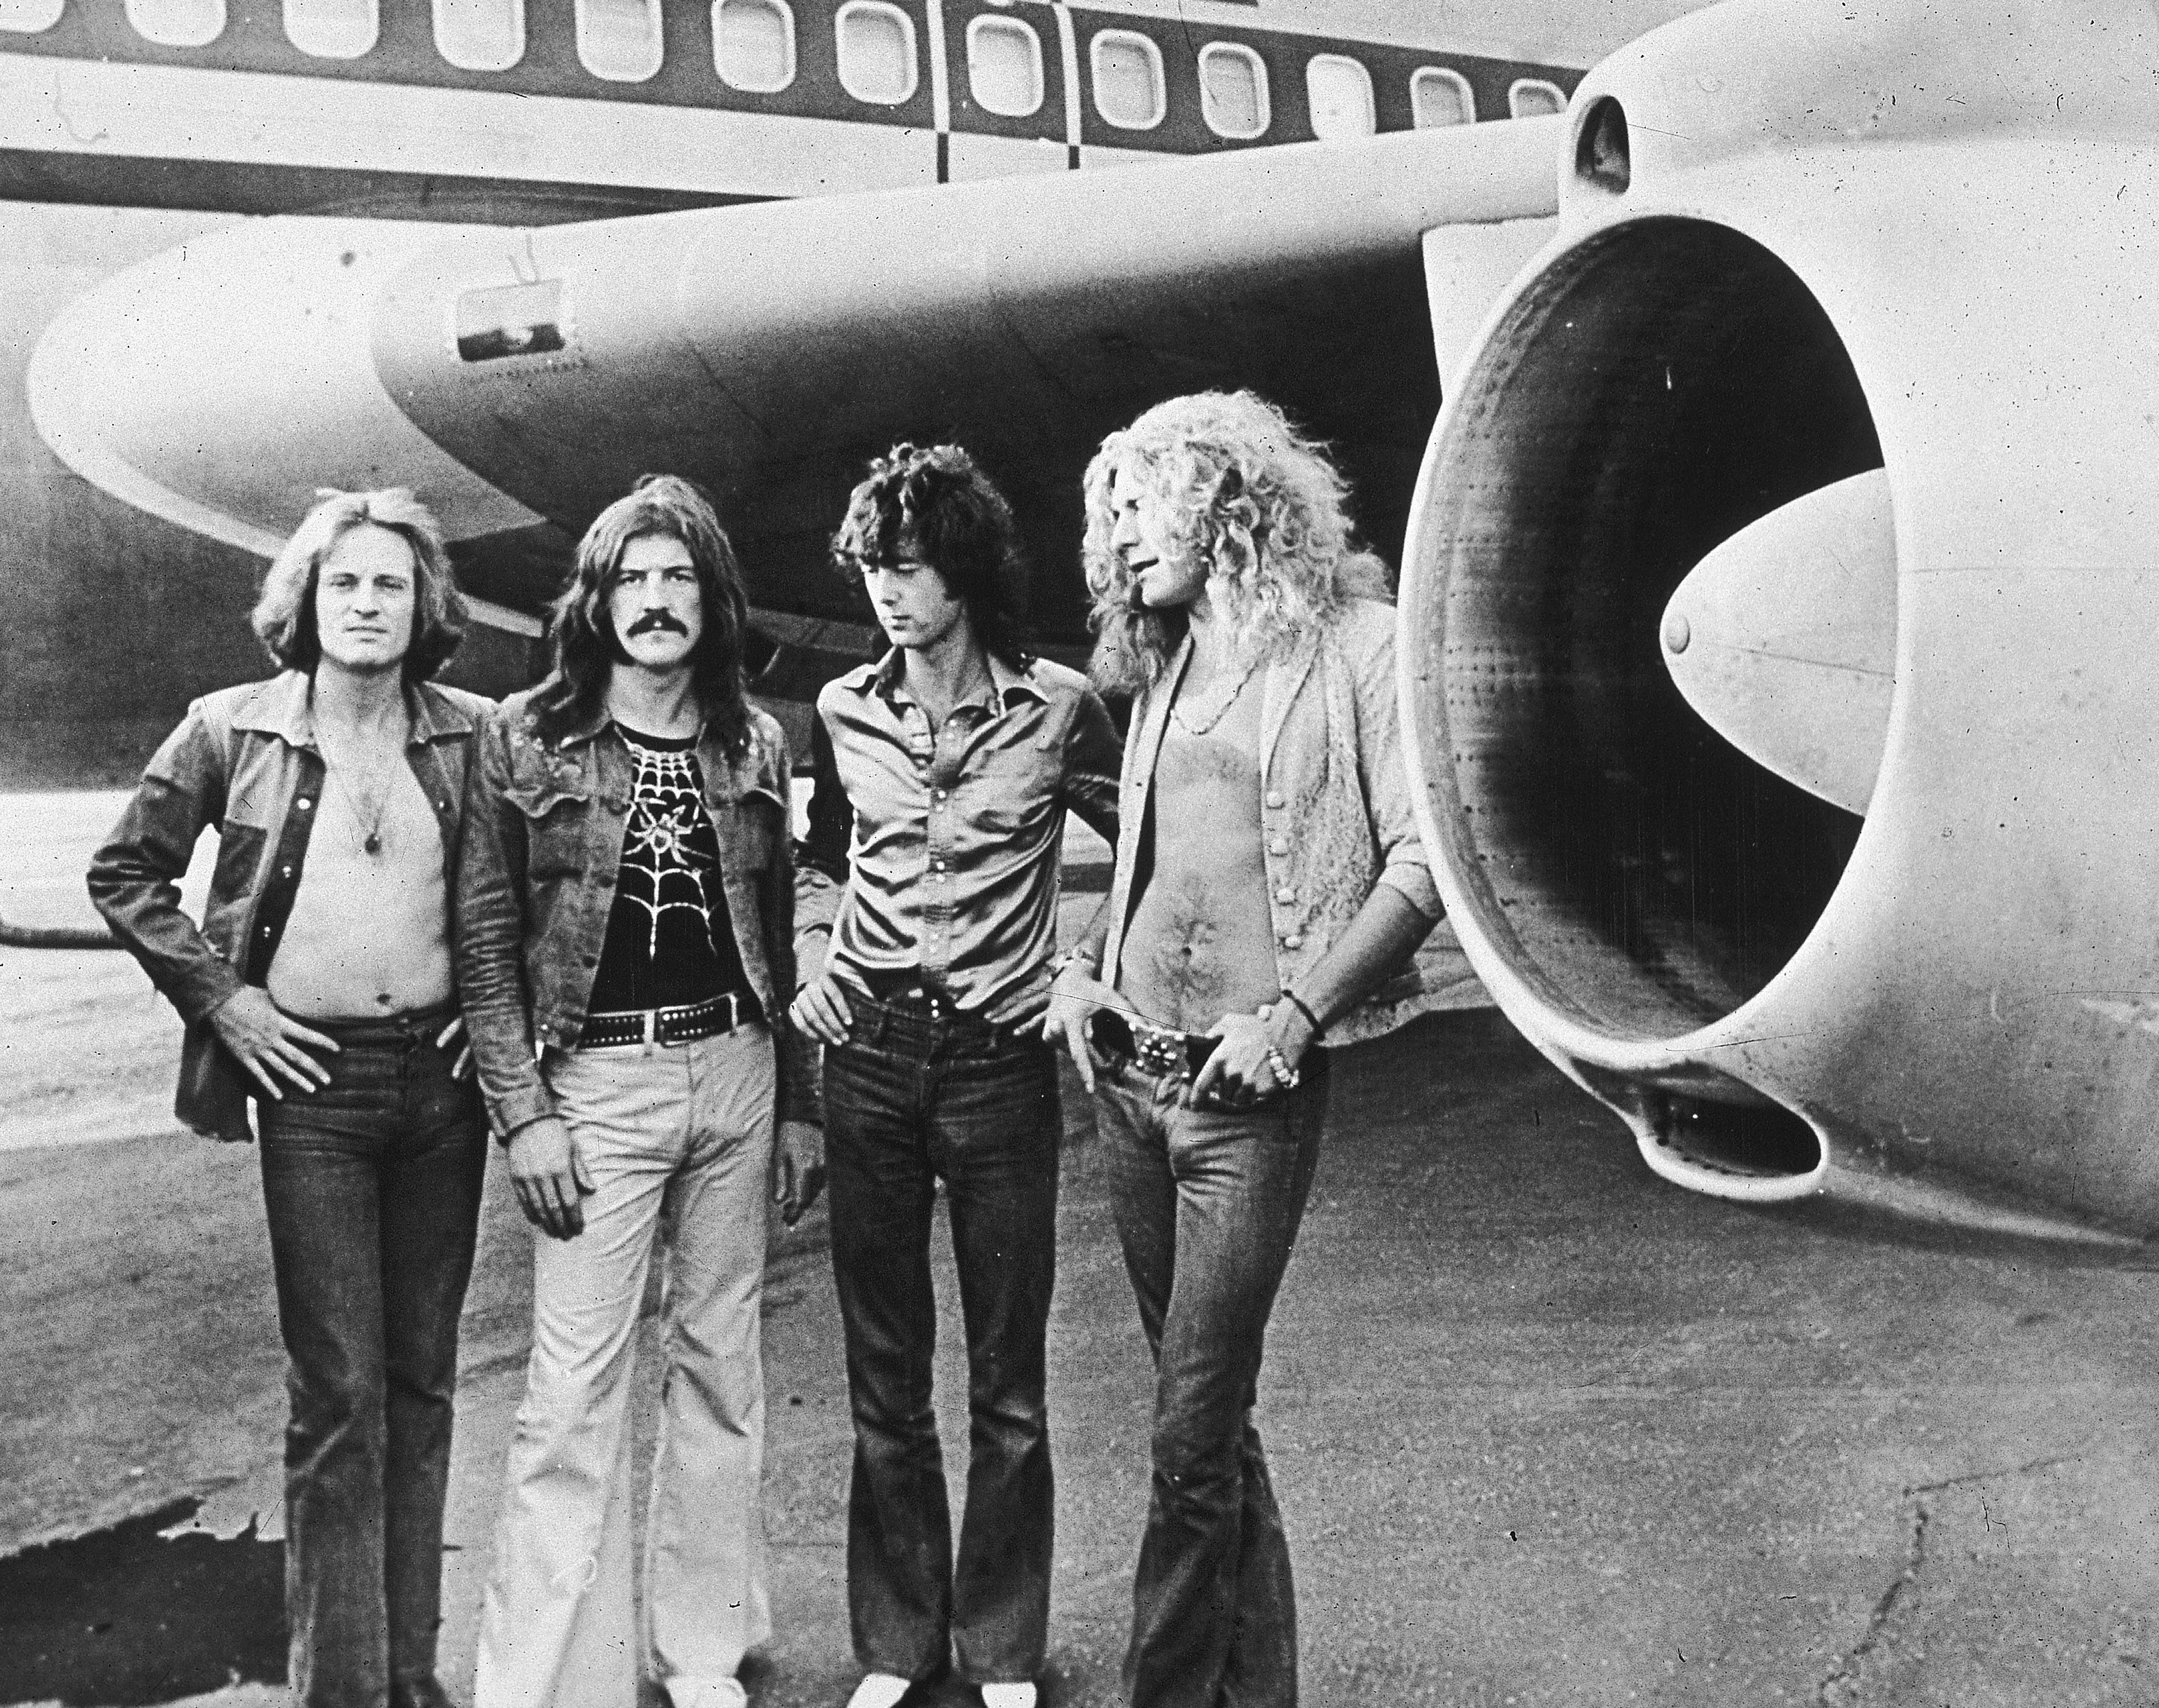 British rock band Led Zeppelin, (left - right): John Paul Jones, John Bonham (1948 - 1980), Jimmy Page and Robert Plant, pose in front of an their private airliner The Starship, 1973. (Photo by Hulton Archive/Getty Images)